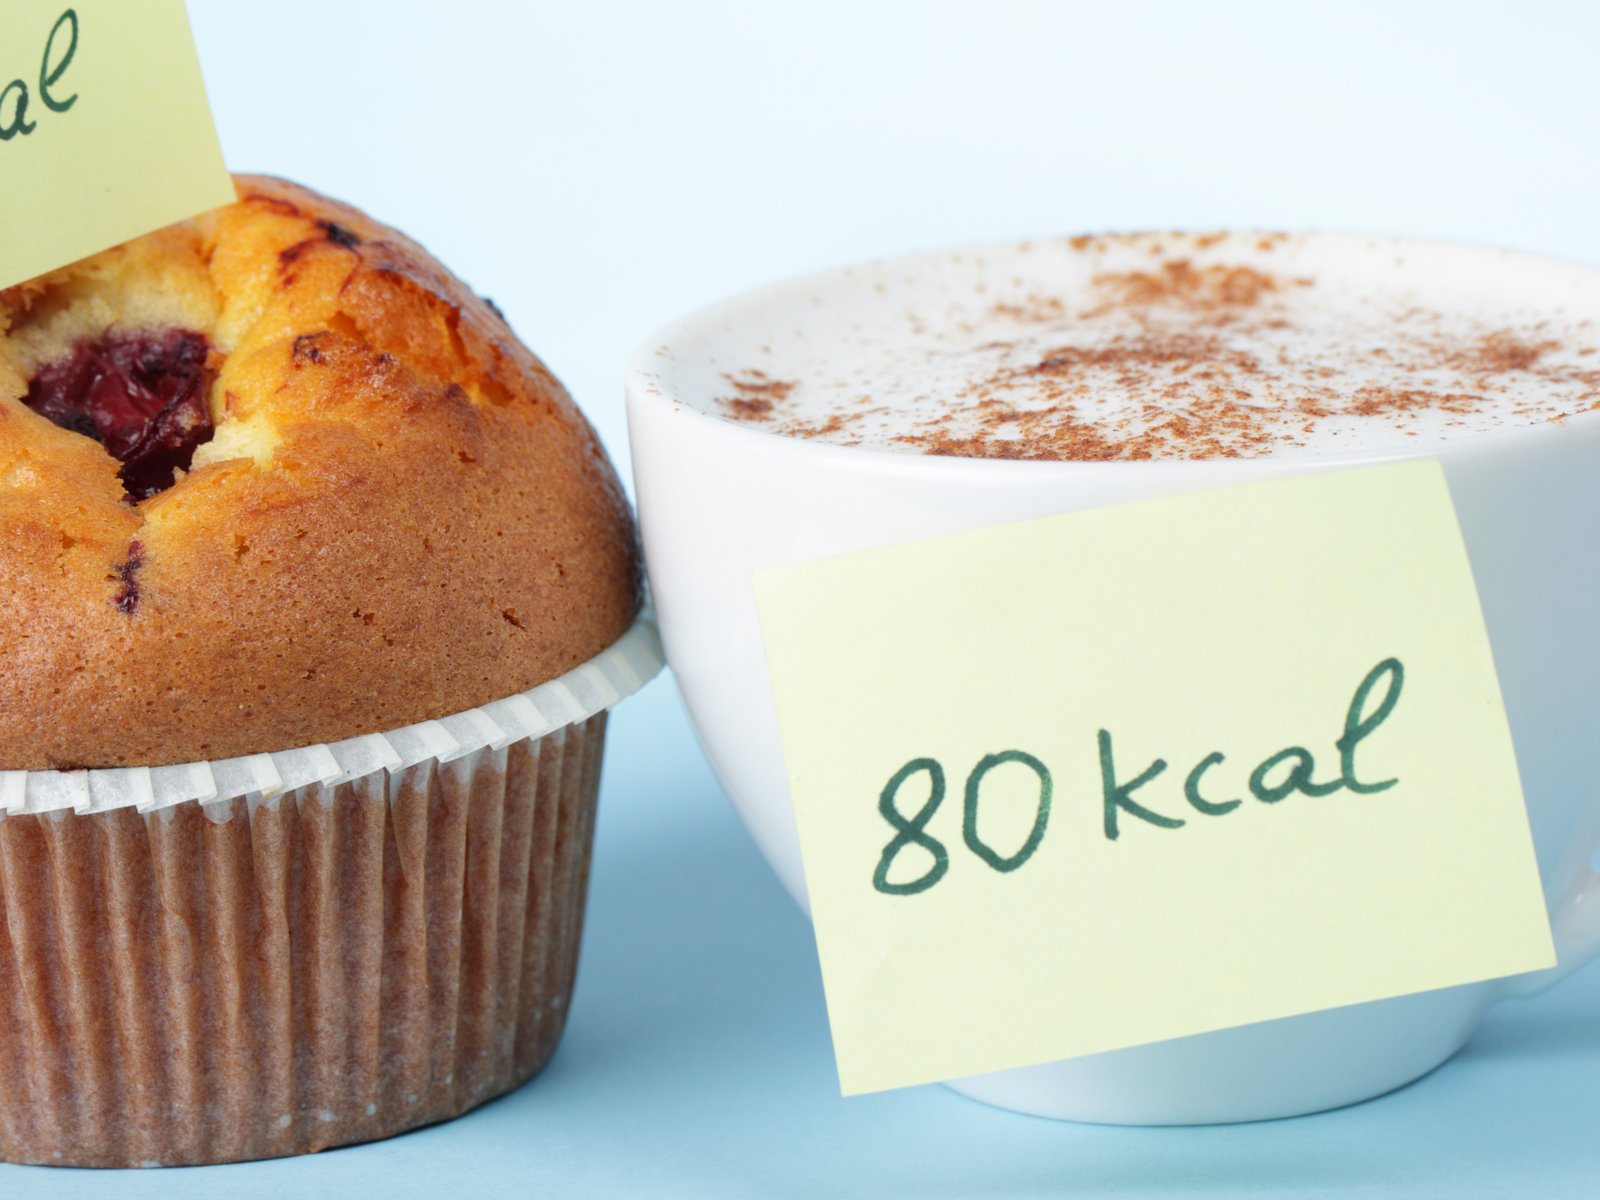 New calorie labelling rules come into force in the UK.&nbsp;